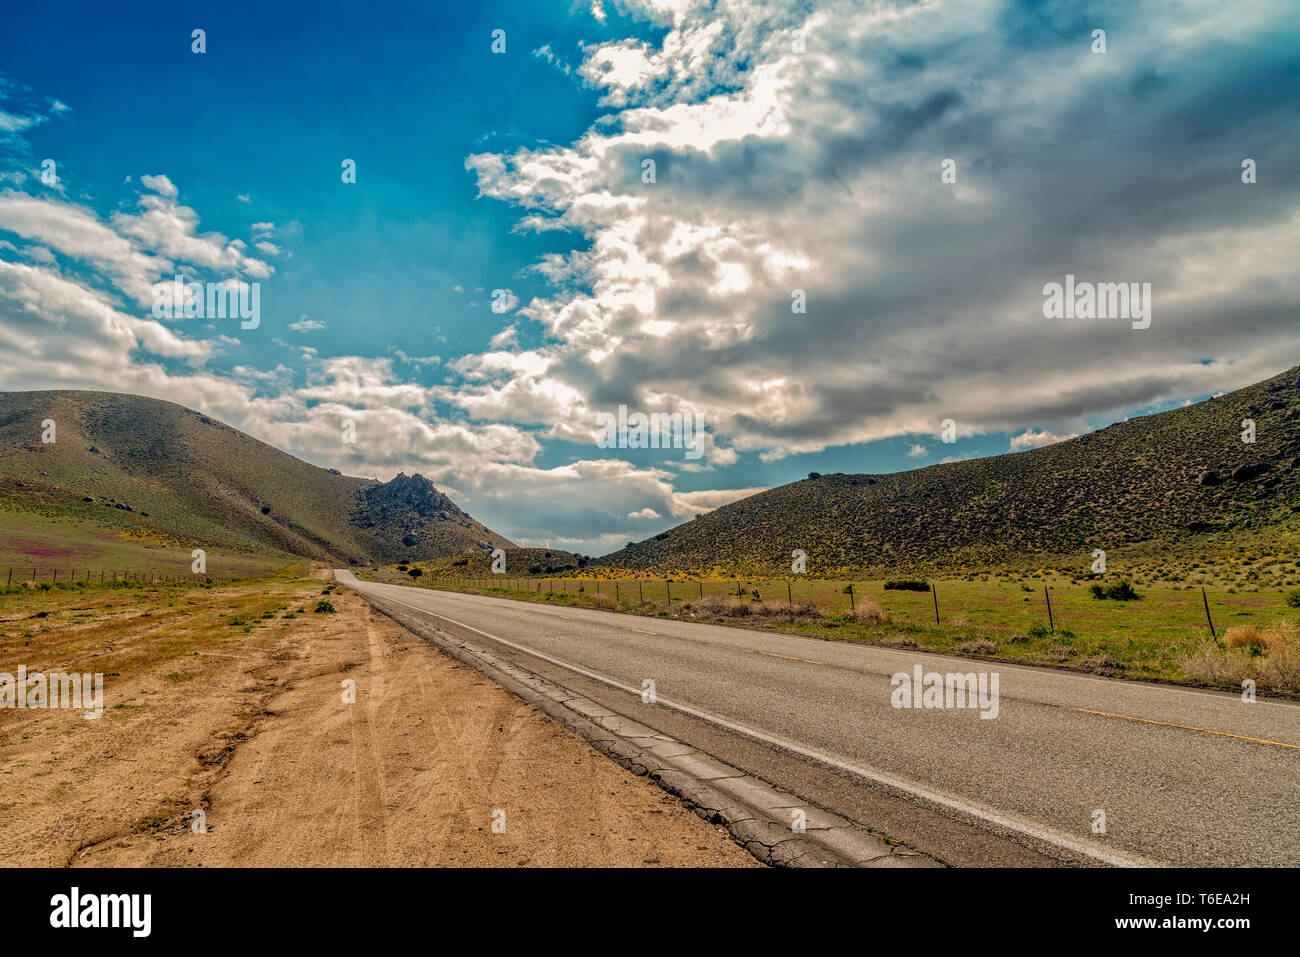 Roadside pull out looking at County road leading into mountains under bright blue sky with white fluffy clouds. Stock Photo